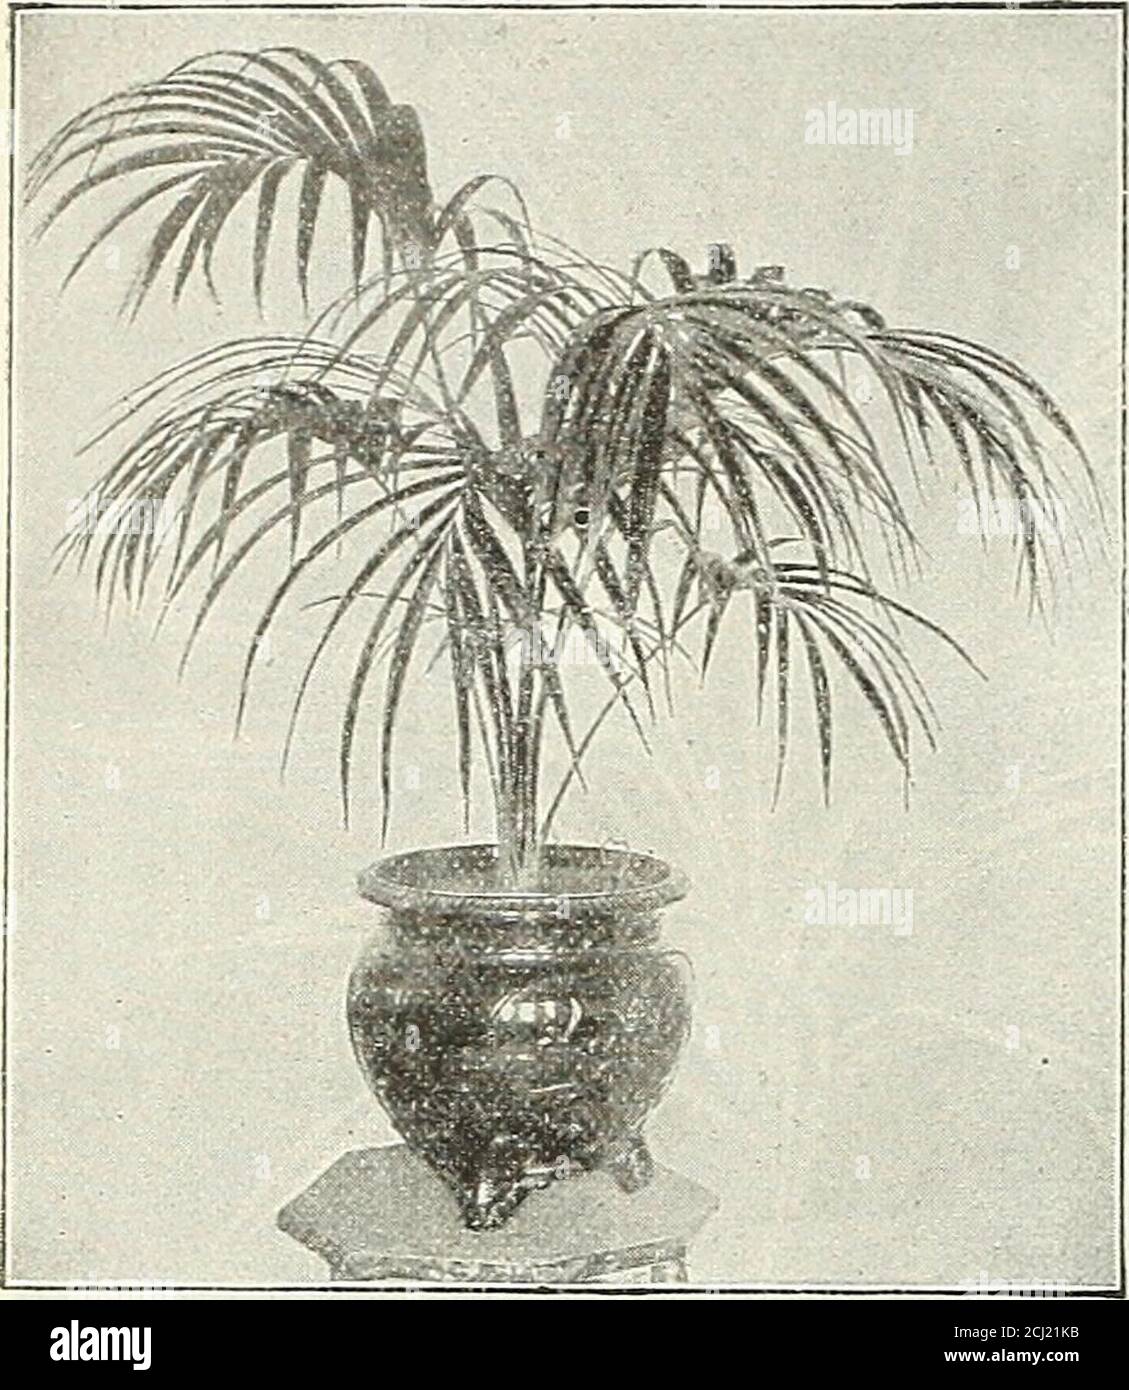 . Dreer's autumn 1904 catalogue . Areca Lutescens. One of the most graceful and beautiful Palms in cultivation ; the foliage is of a bright glossy-greenwith rich golden-yellow stems.3-inch pots, 4 to 5 leaves, 12 to I.t inches high 5 to 6 15 to IS 6 to 7 18 to -iO 6 to 8 24 to 30 8 to 10 &lt; • 30 to 36 10 to 12 86 to 42 10 to 12 48 fine bushv i4an s, 60 ..$0 2n 5075. 1 50. 2 nO. 3 50. 5 00.10 00 each. Cocos Weddeliana. The most elegant and graceful ofall the smaller Palms. Admirnble for fern dishes, as they areof slow growth and maintain their beauty for a long time. 3-inch pots, ] 2 inches h Stock Photo